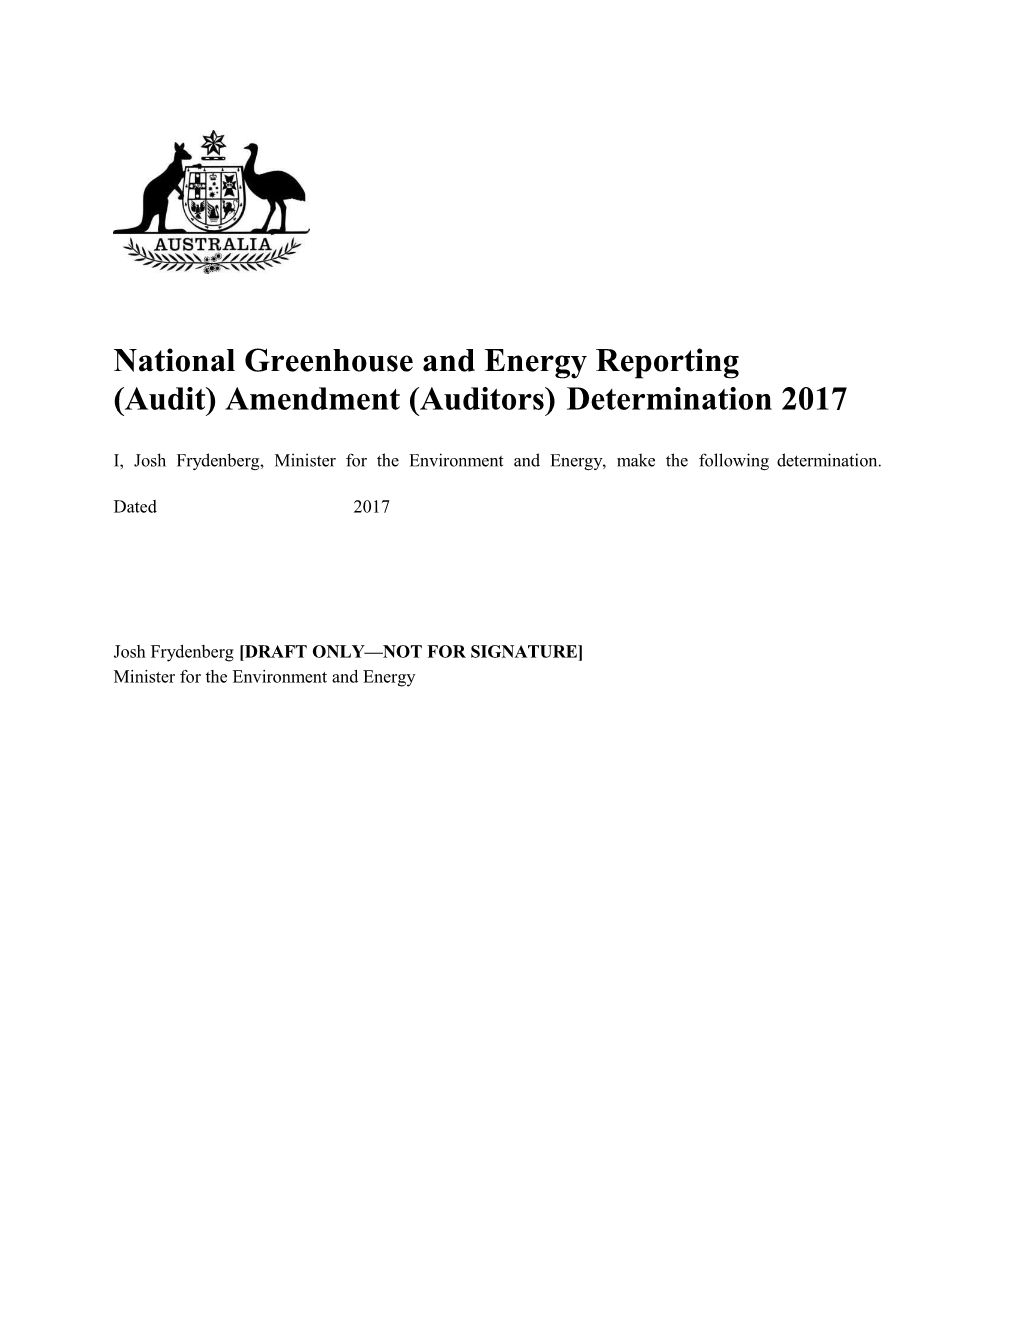 Exposure Draft - National Greenhouse and Energy Reporting (Audit) Amendment (Auditors)